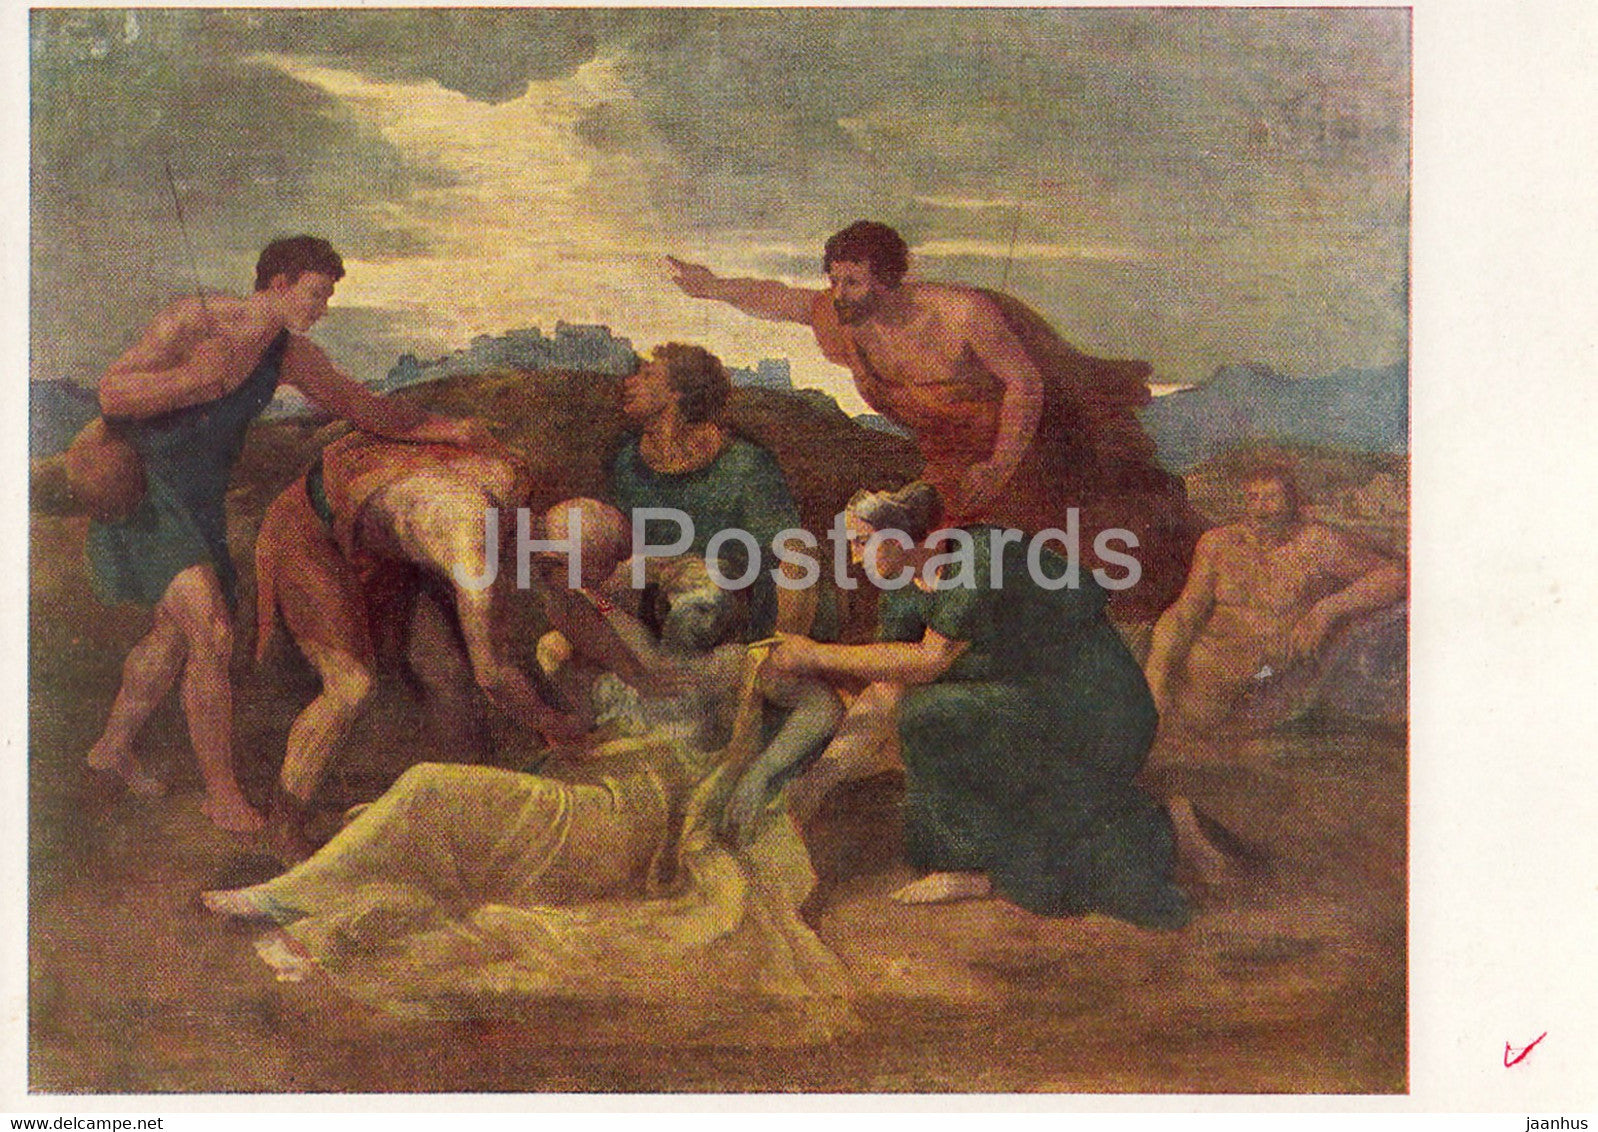 painting by Nicolas Poussin - Rescue of Zenoby - French art - 1966 - Russia USSR - unused - JH Postcards